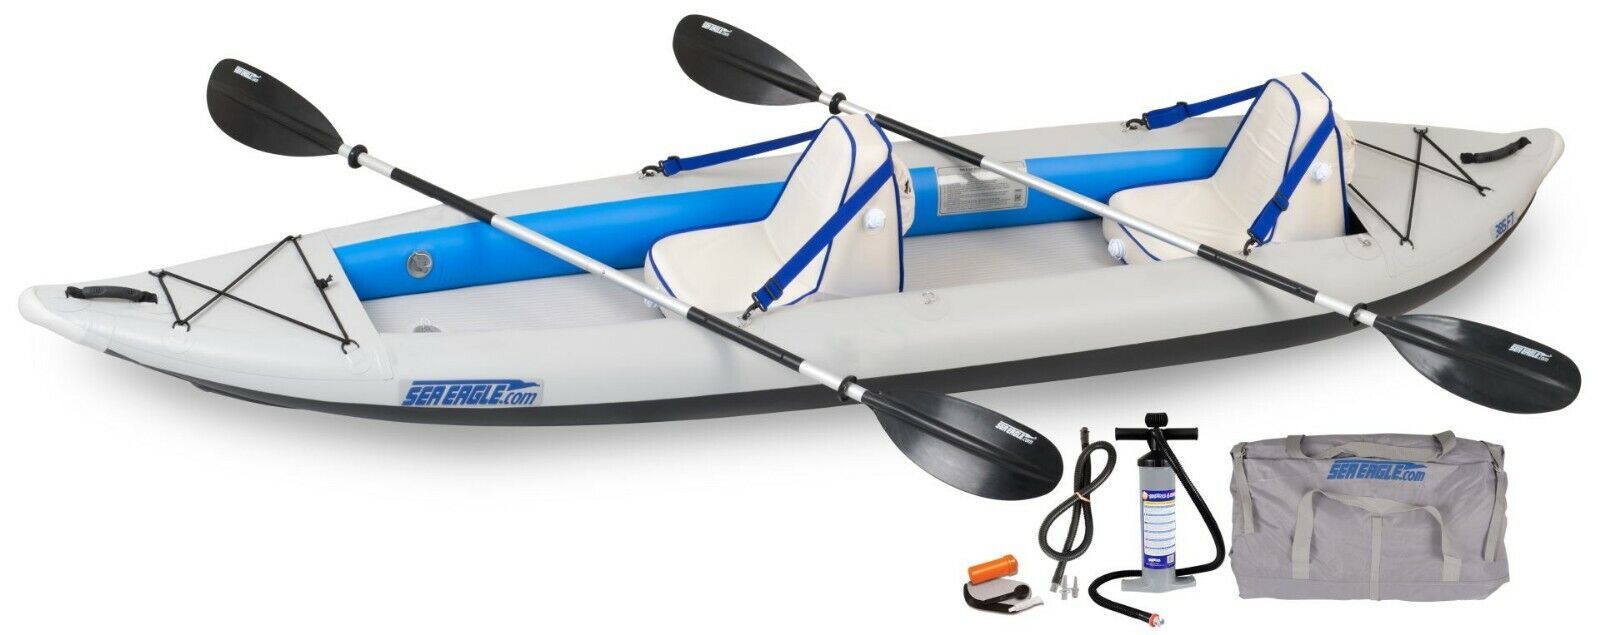 Primary image for Sea Eagle 385ft Deluxe Package Inflatable Fast Track Kayak -Paddles Seats Pump+